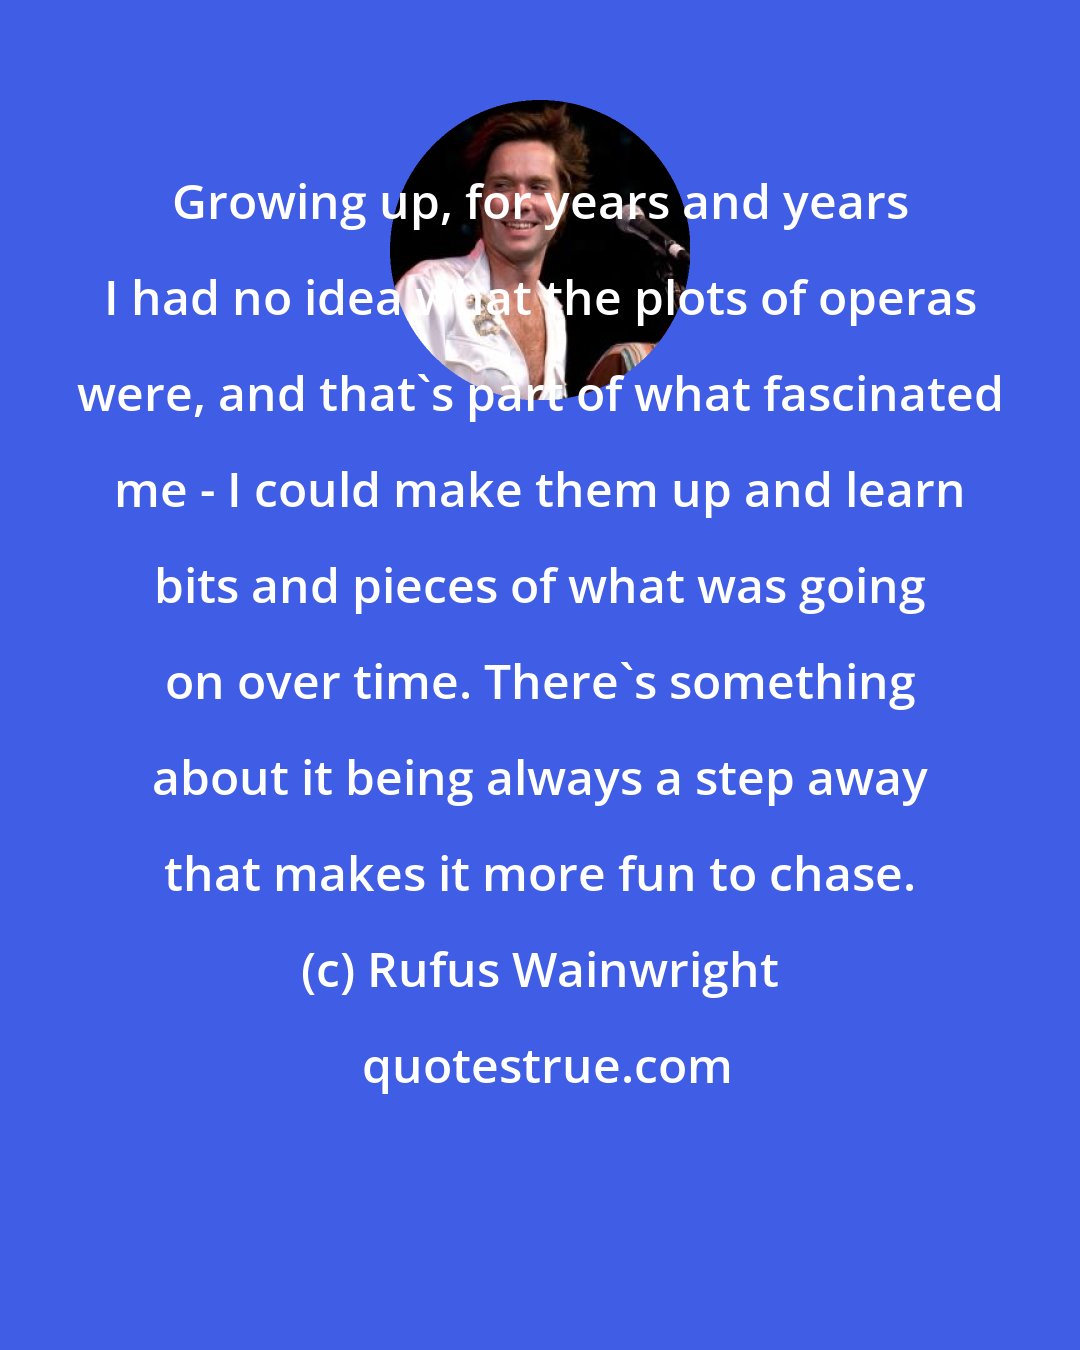 Rufus Wainwright: Growing up, for years and years I had no idea what the plots of operas were, and that's part of what fascinated me - I could make them up and learn bits and pieces of what was going on over time. There's something about it being always a step away that makes it more fun to chase.